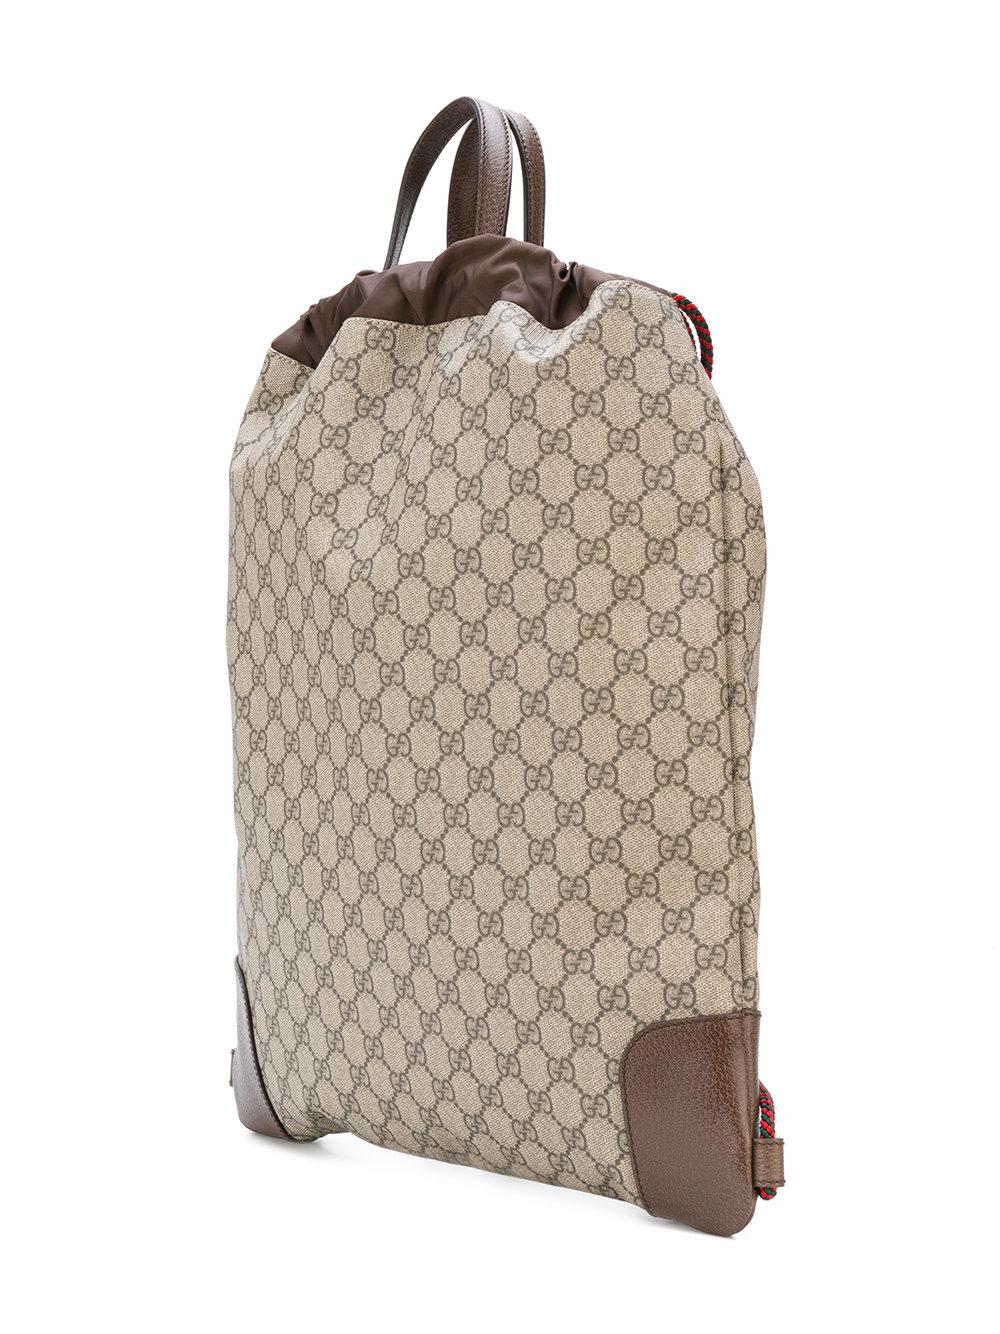 Lyst - Gucci Courrier Gg Supreme Backpack in Brown for Men